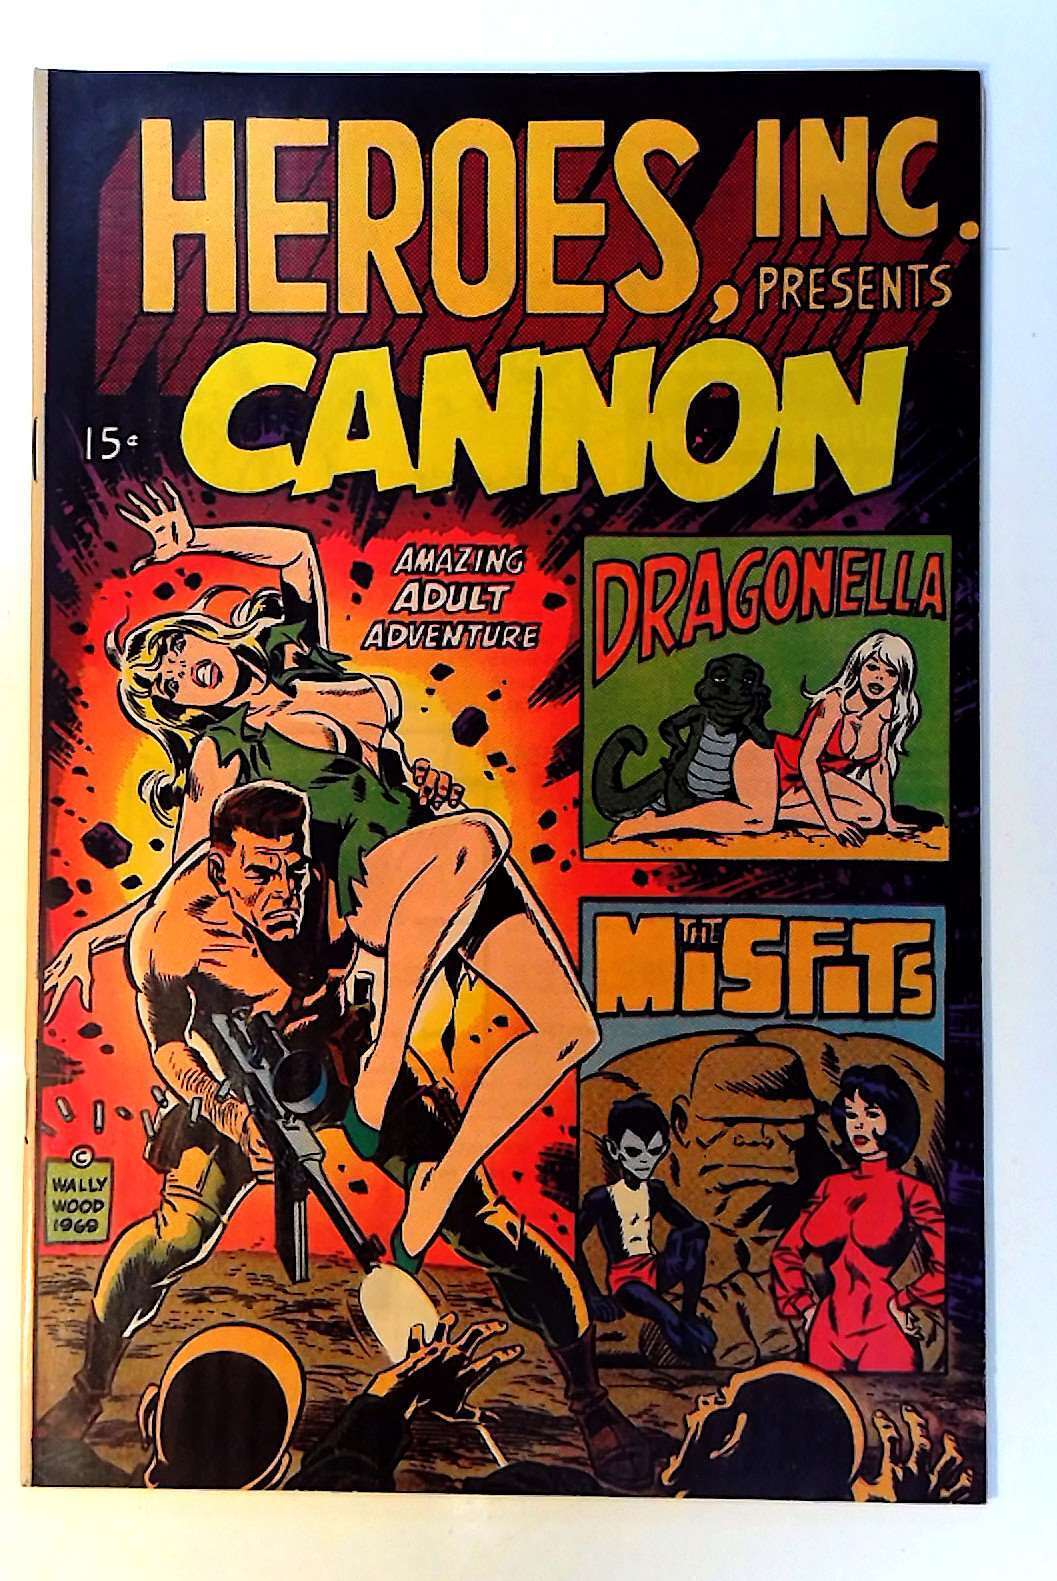 Heroes, Inc. Presents Cannon #1 Wallace Wood (1969) VF 1st Print Comic Book